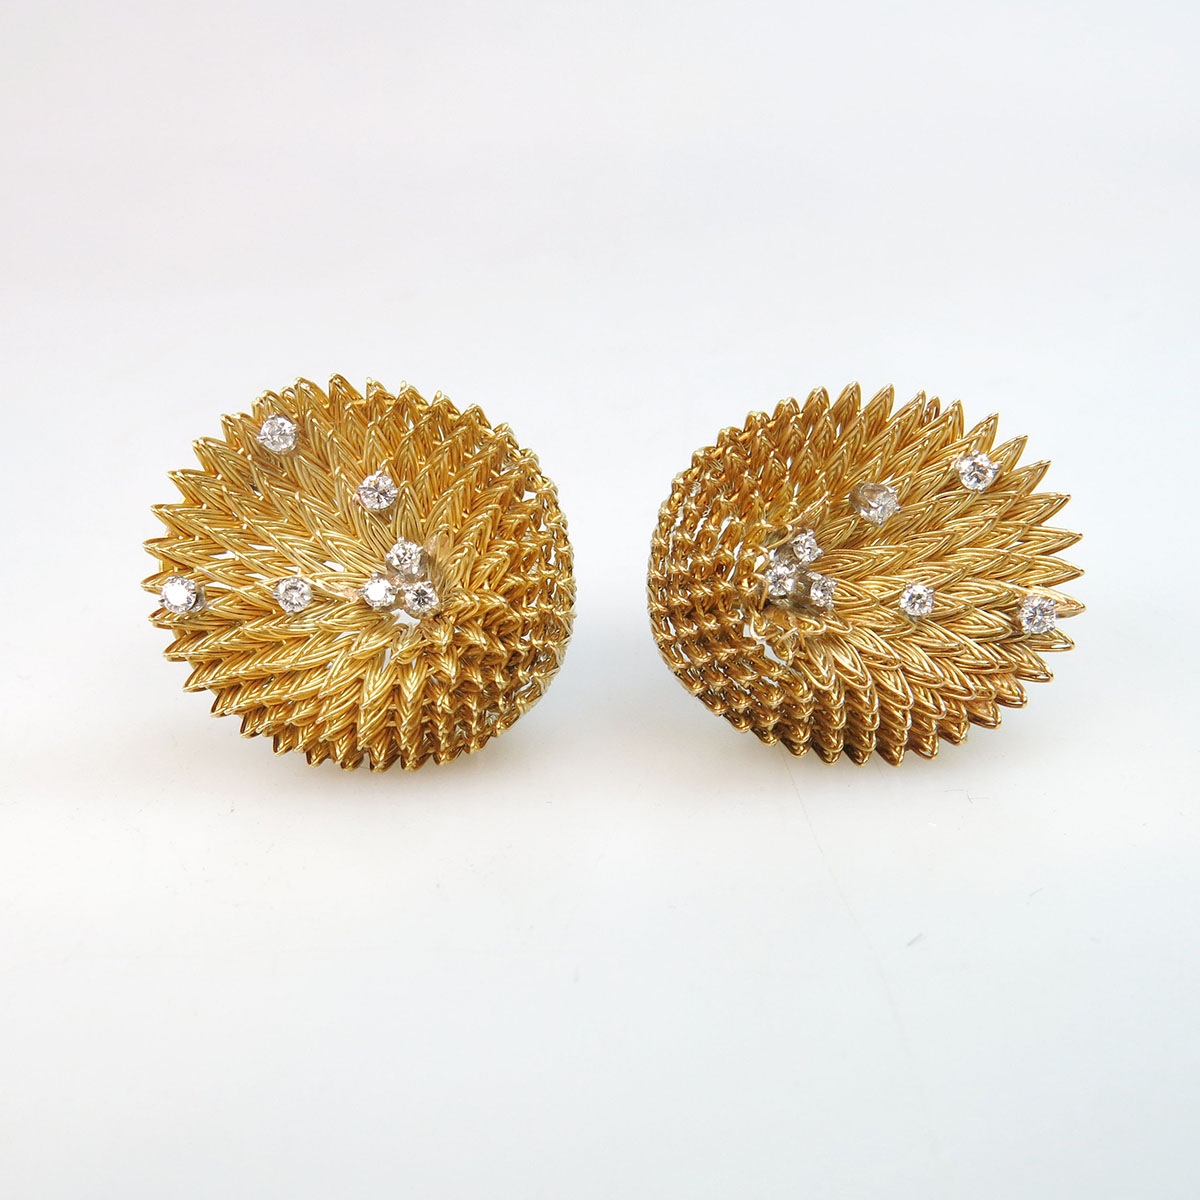 Pair Of 18k Yellow Gold Clip Back Earrings